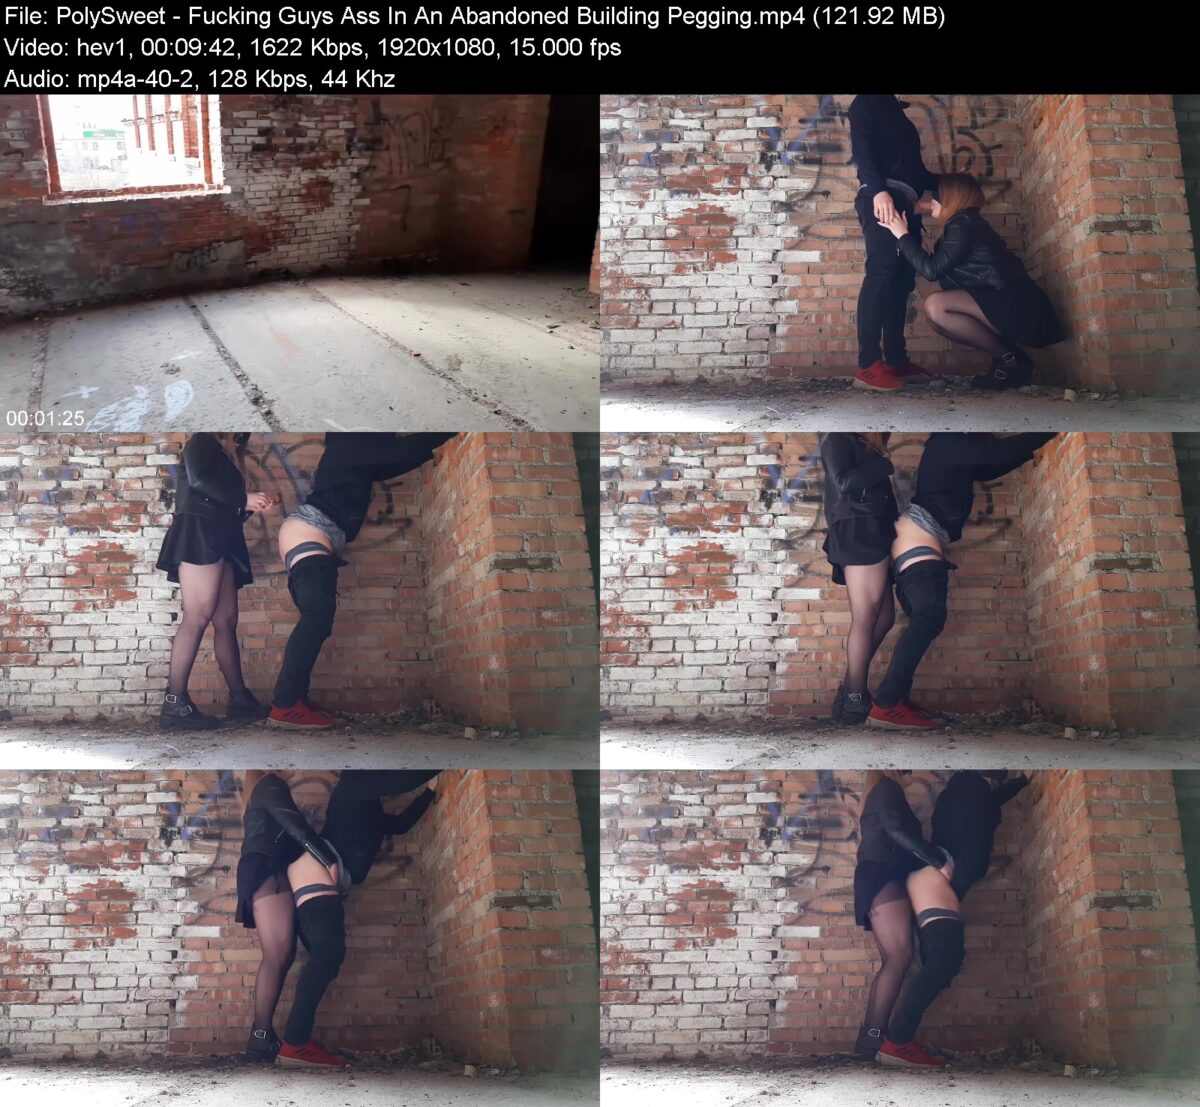 PolySweet - Fucking Guys Ass In An Abandoned Building Pegging